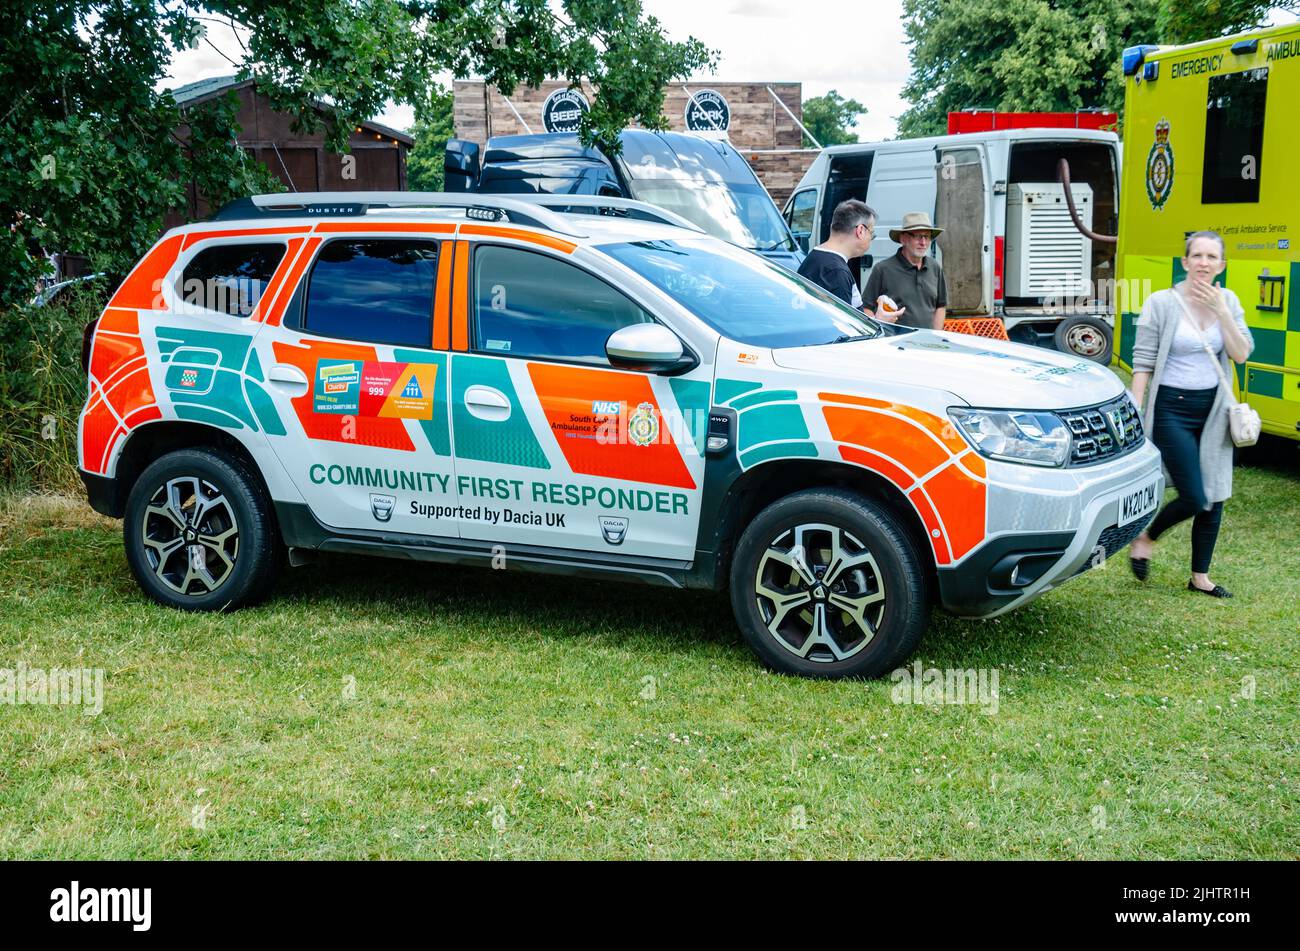 A 2020 Dacia Duster 4x4 vehicle used by NHS Community First Responder ambulance service seen here at The Berkshire Motor Show in Reading, UK Stock Photo